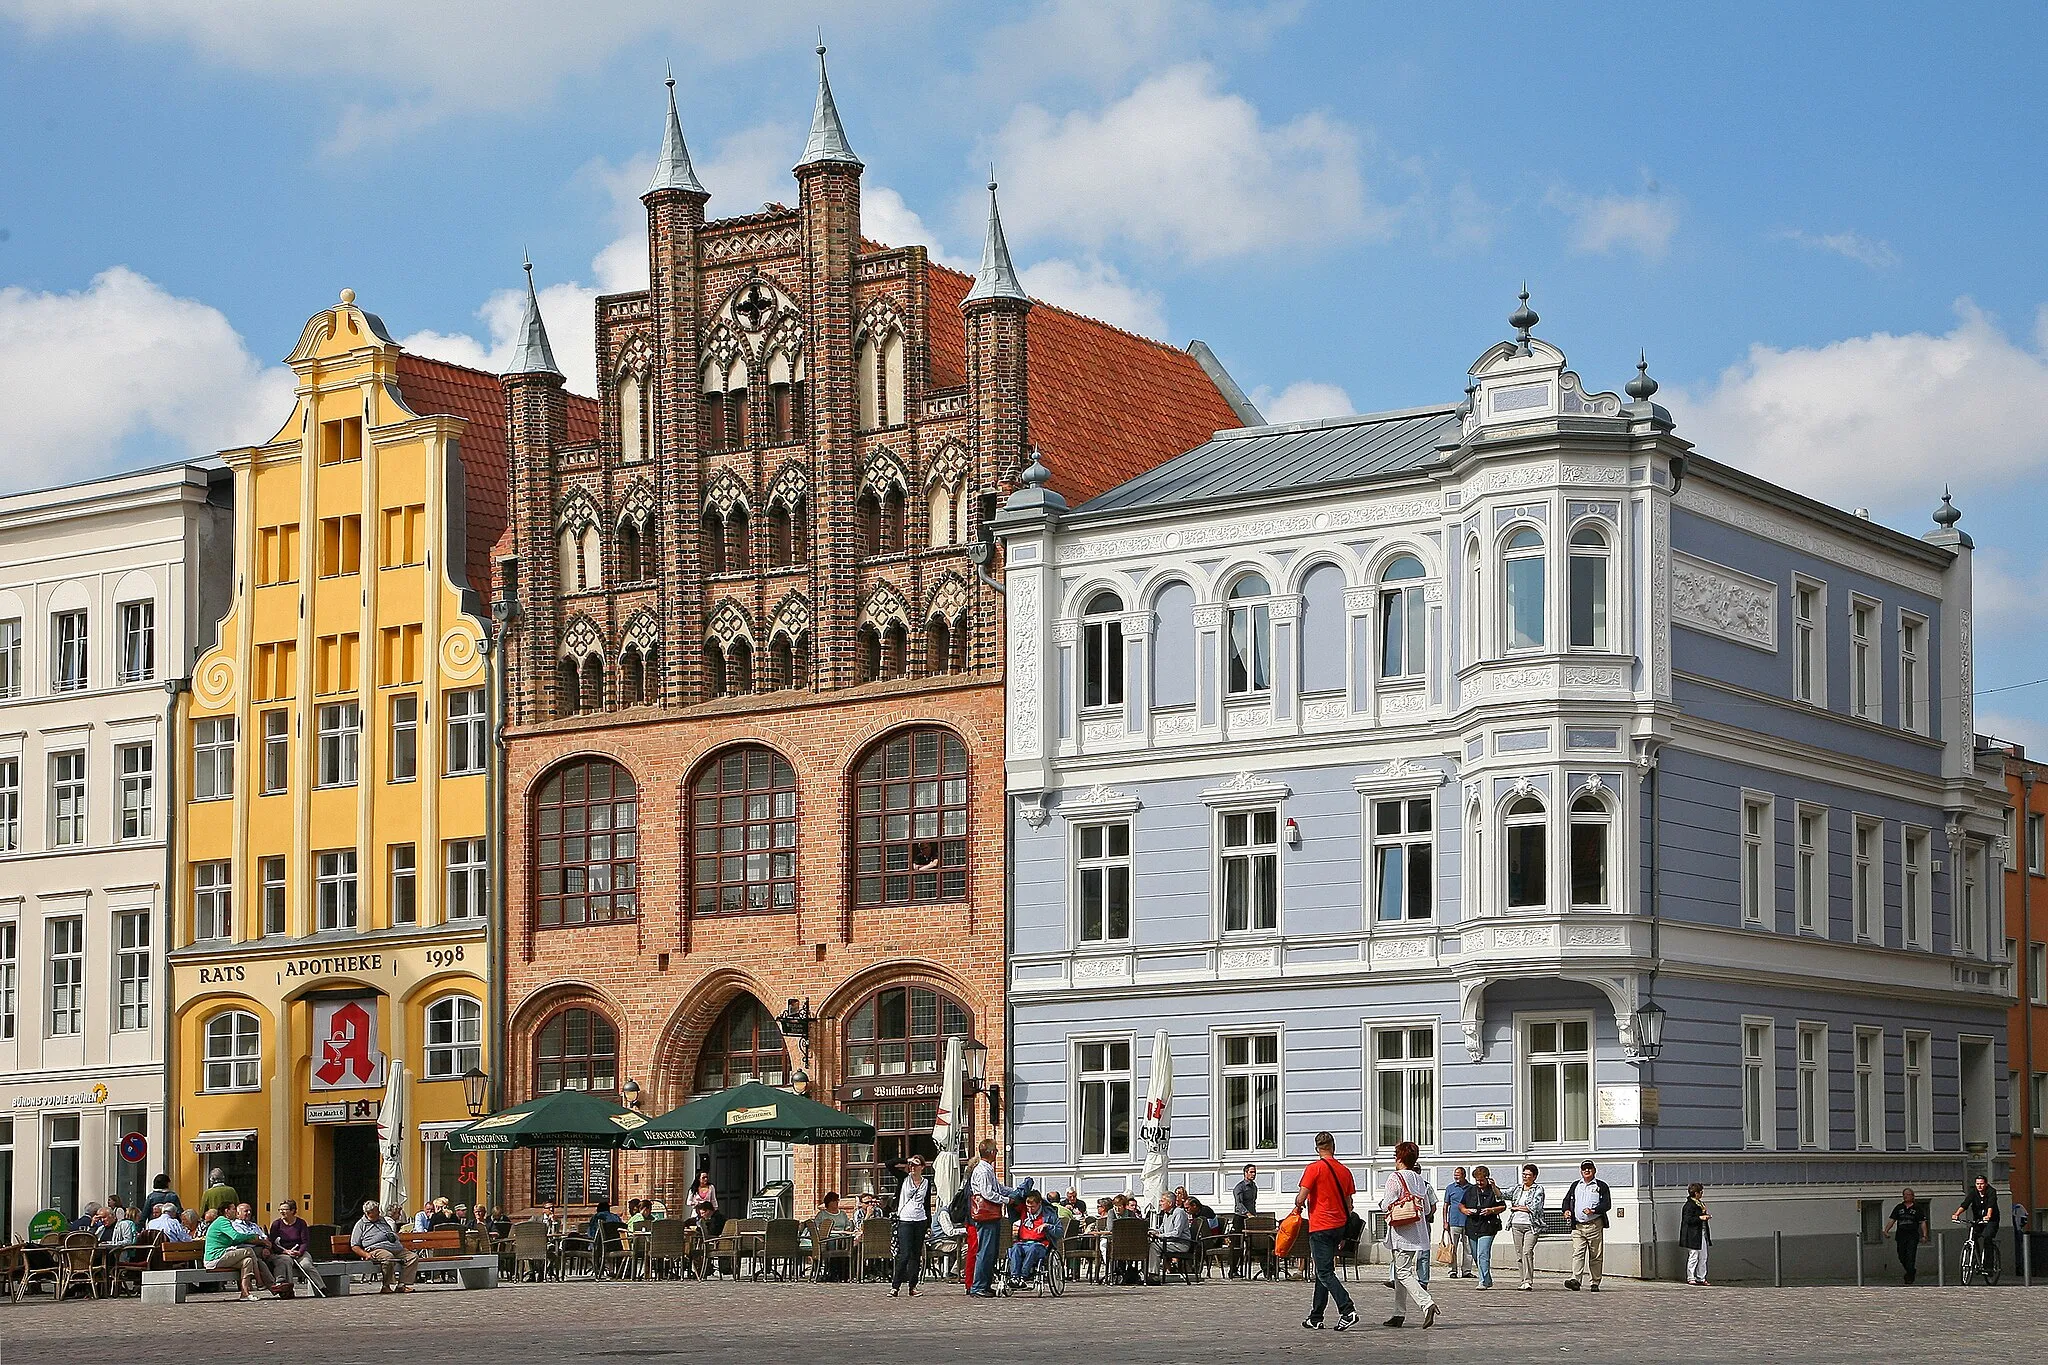 Photo showing: Alter Markt" with the Wulflamhaus: "Alter Markt" is the market square in the German Hansestadt Stralsund and the center of the historic old town. The "Wulflamhaus" is a 14th century building in bakingsteine pottery.